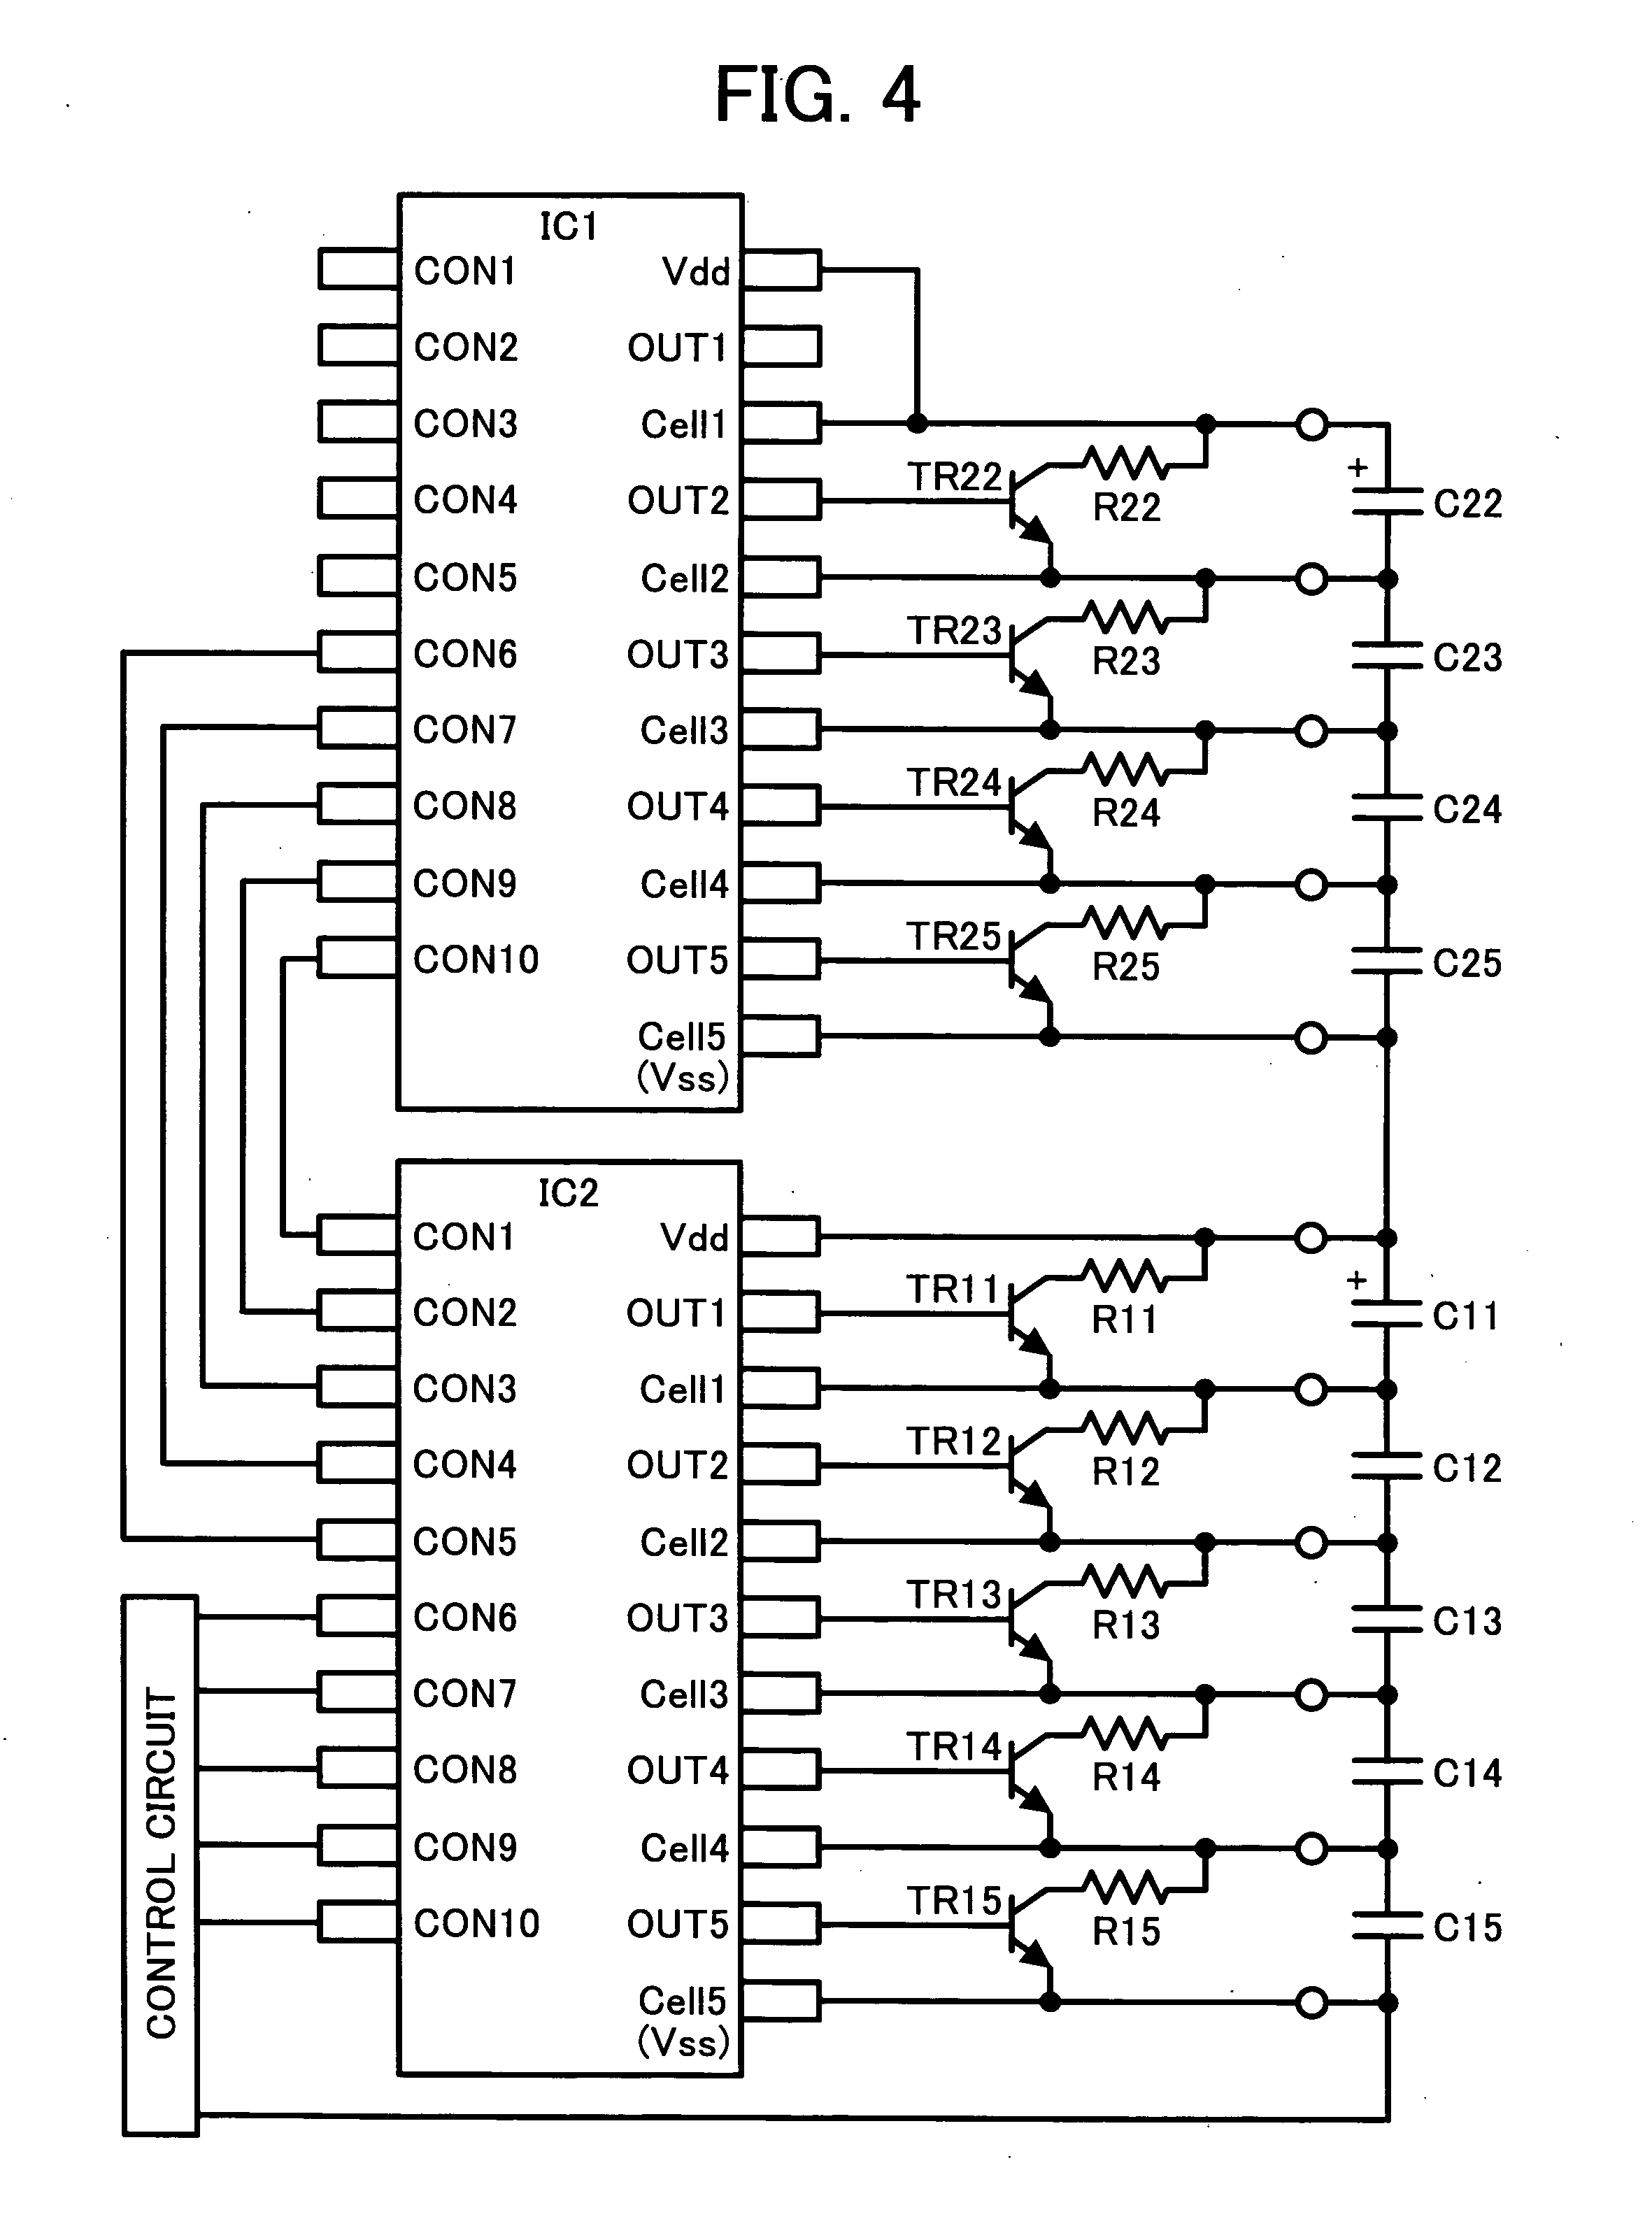 Semiconductor apparatus and method of charging desired number of capacitors